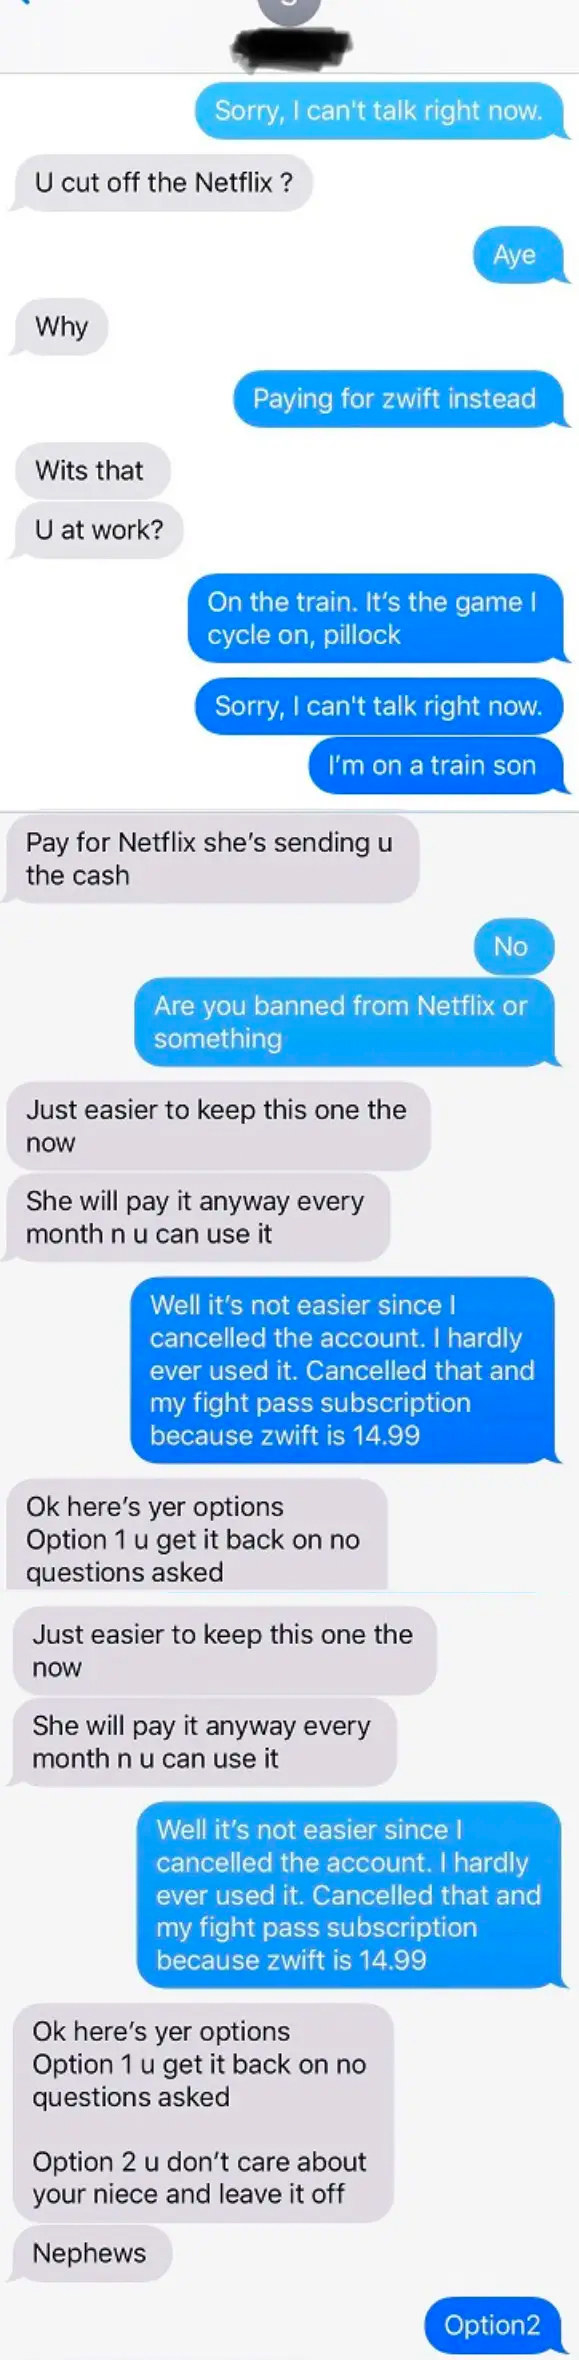 person getting mad that their brother got rid of Netflix